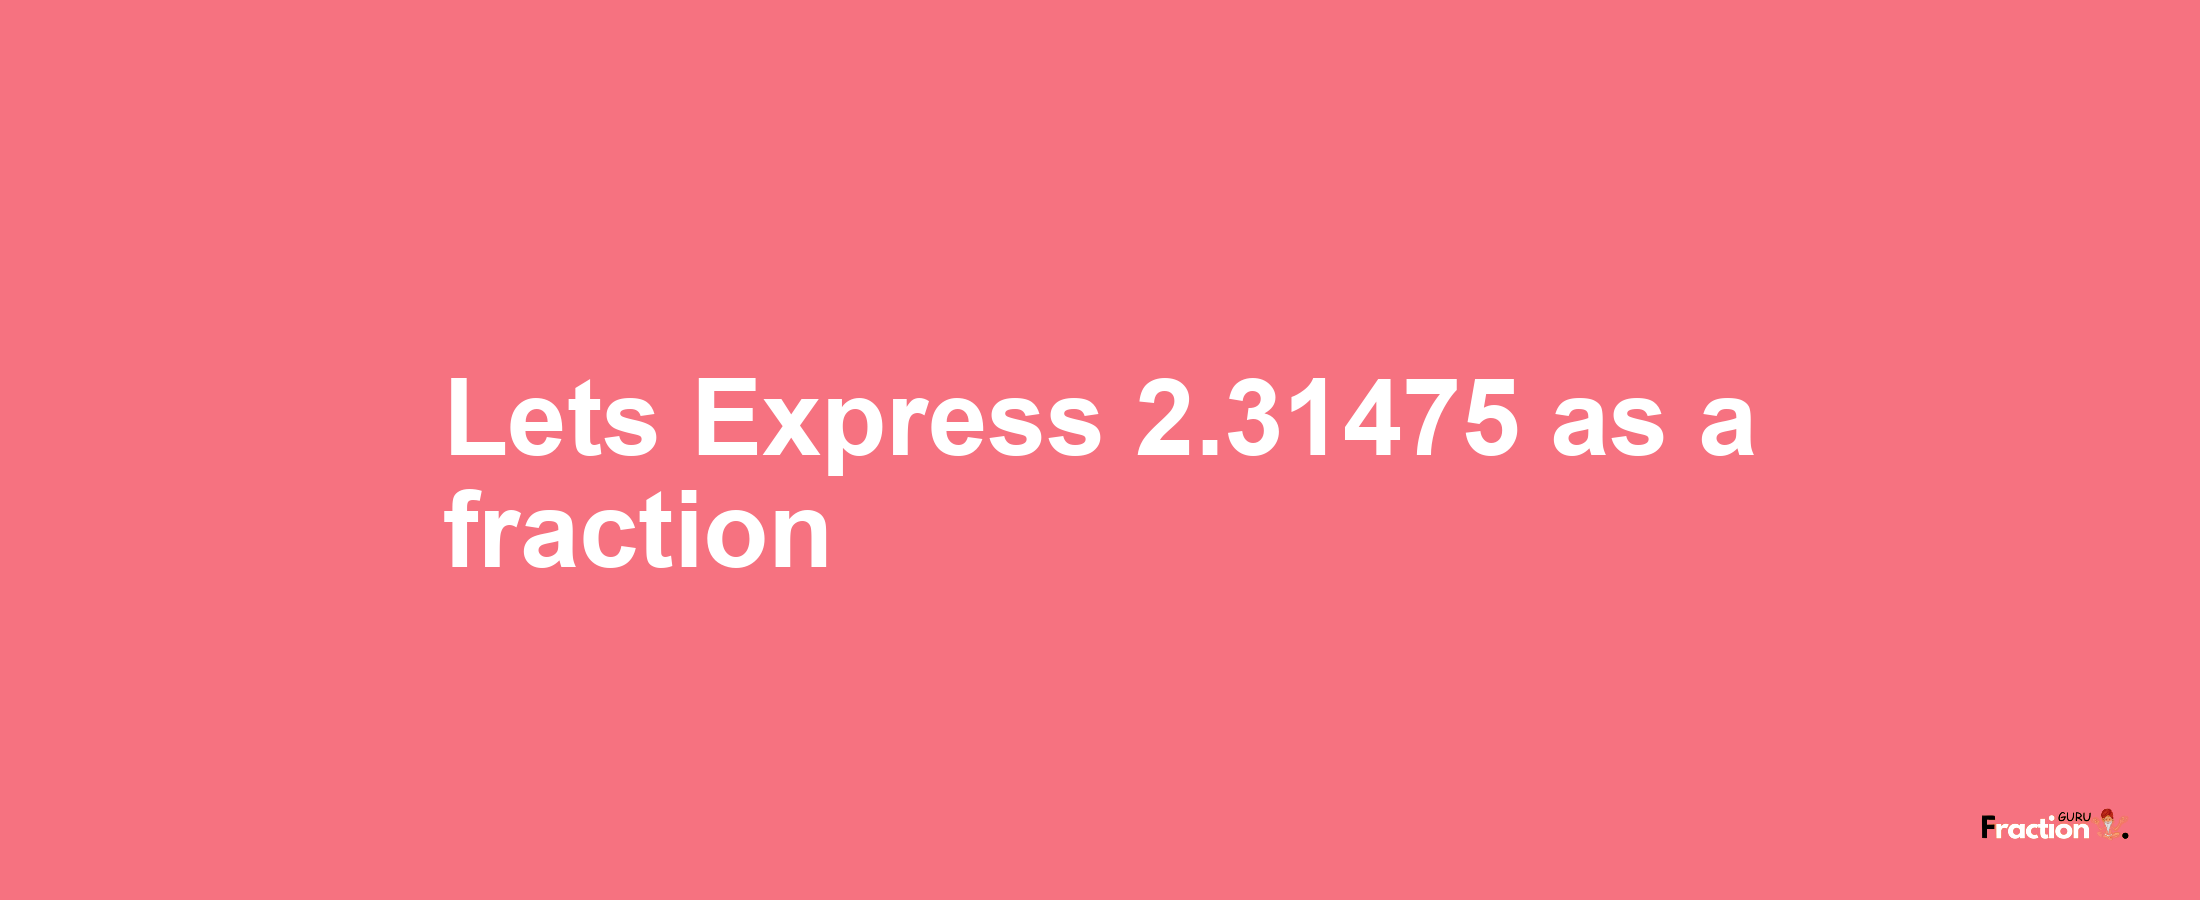 Lets Express 2.31475 as afraction